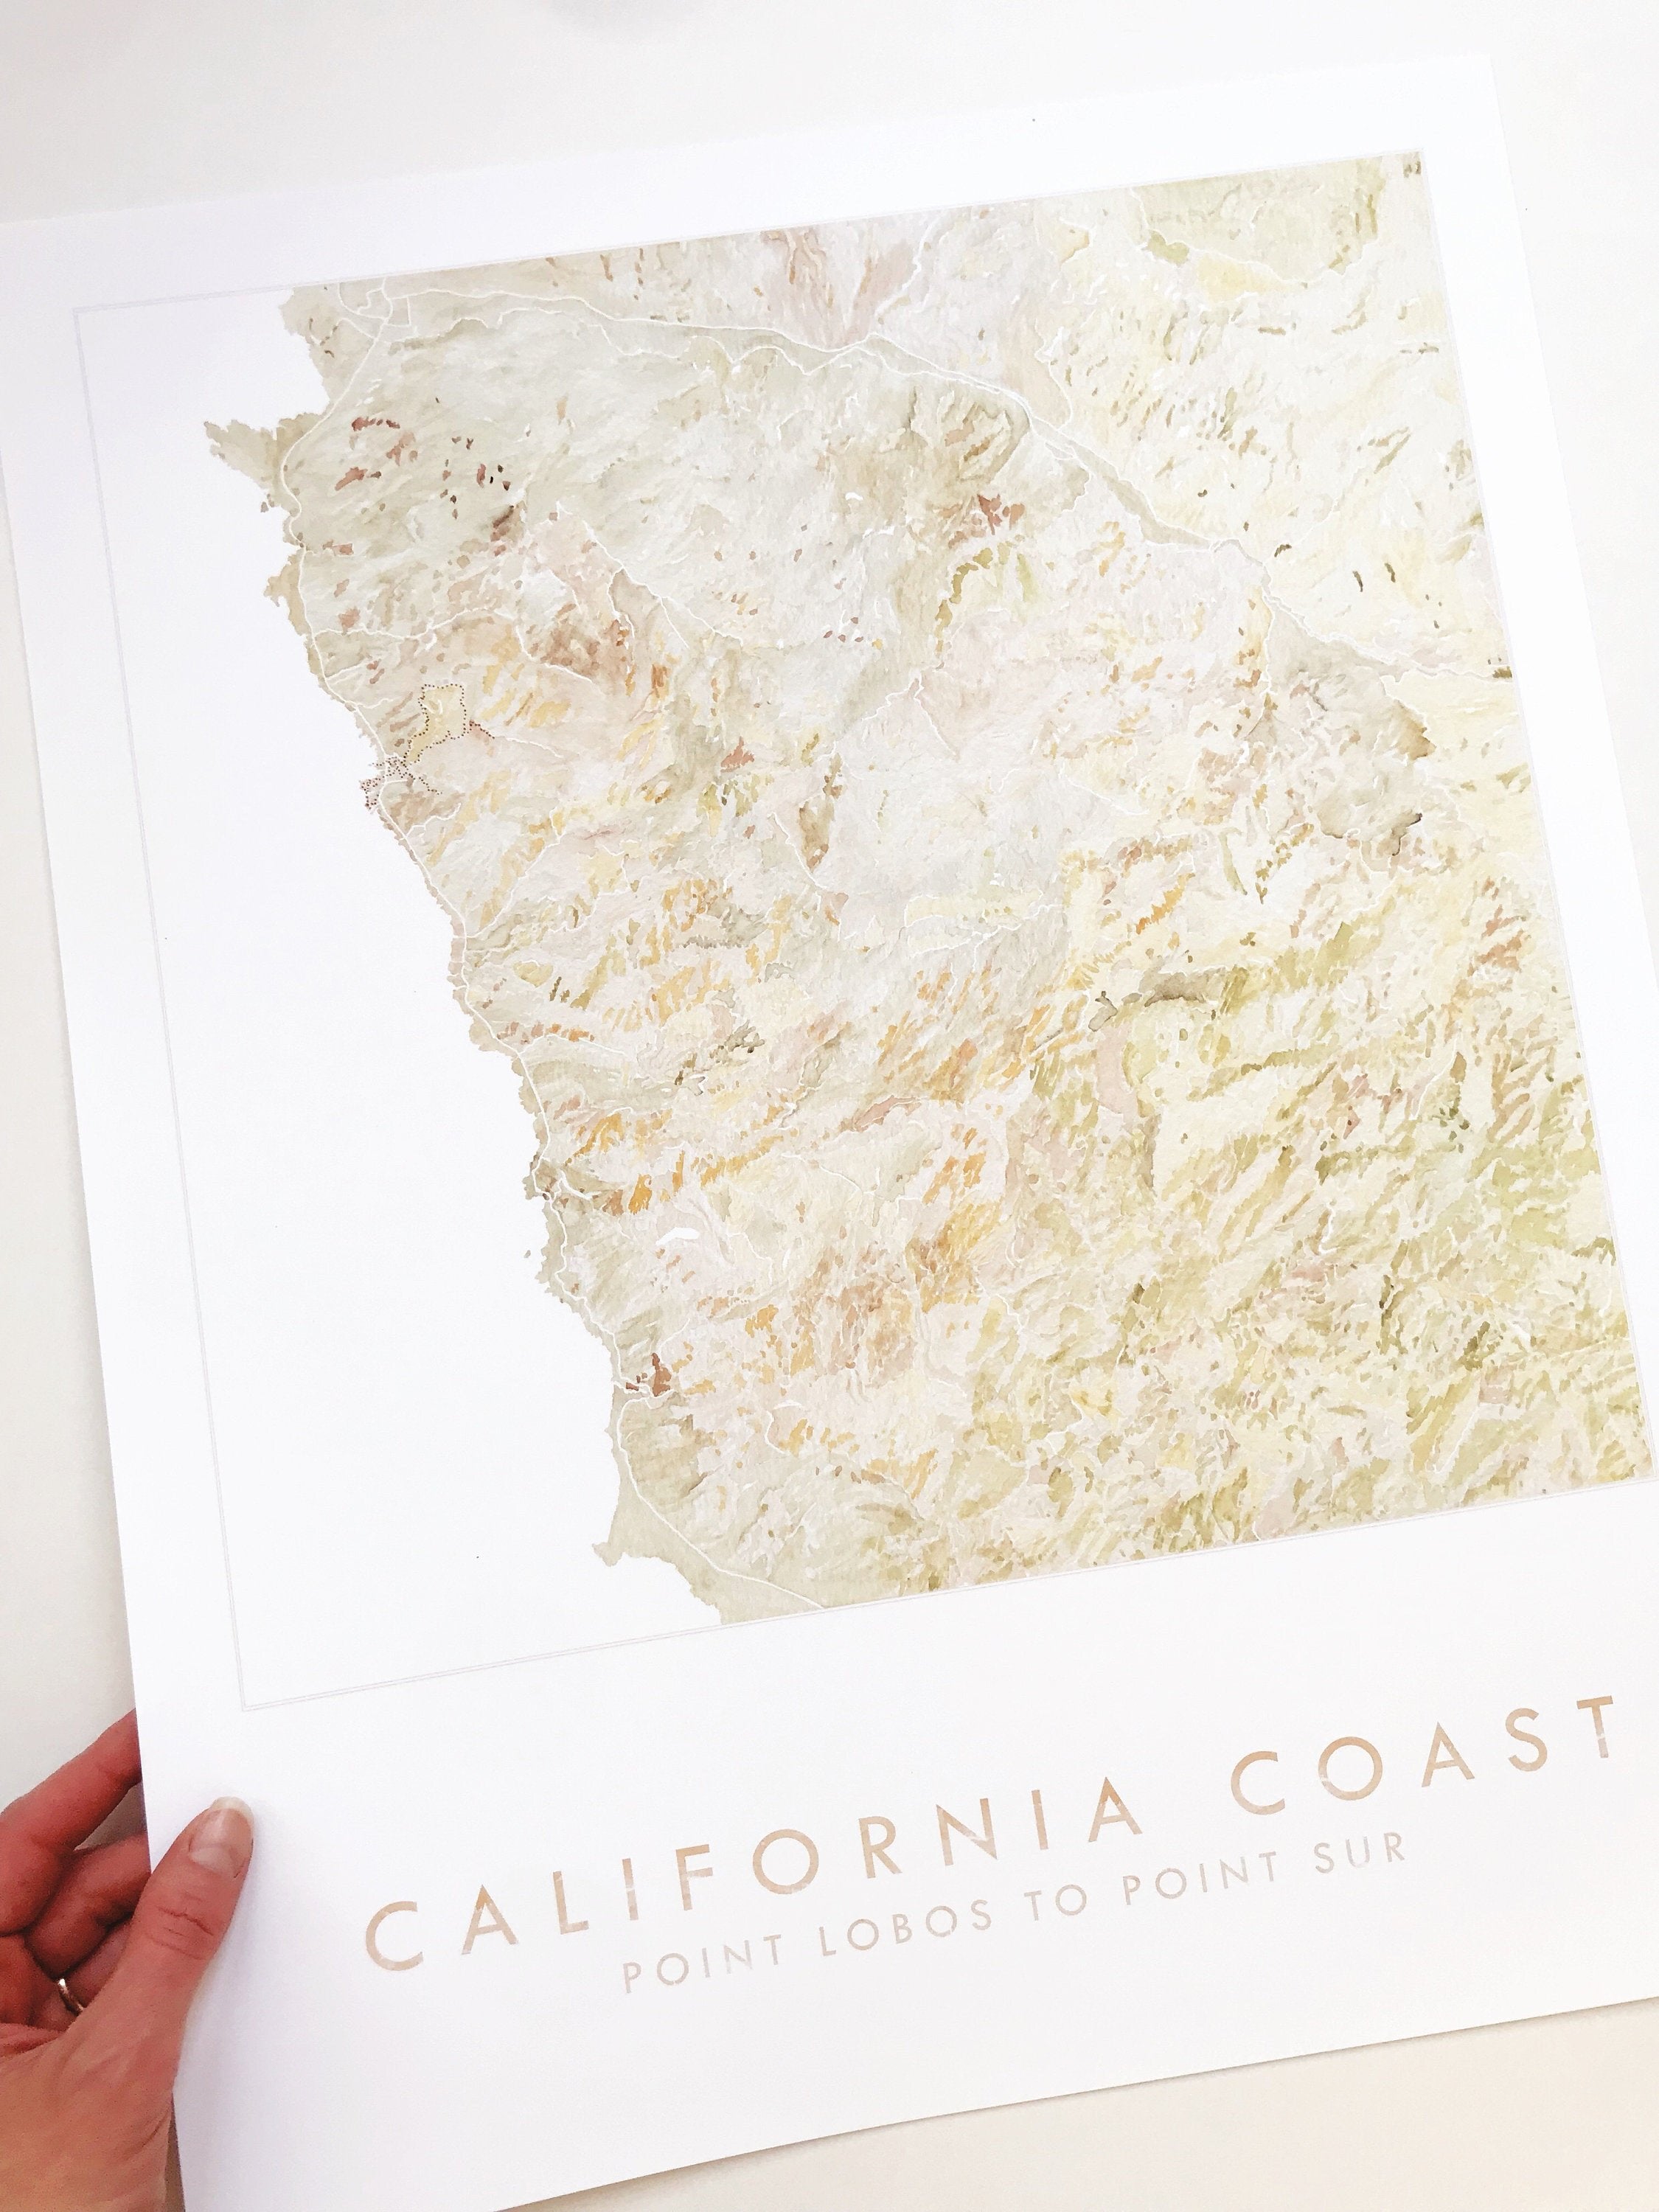 CALIFORNIA Coast Point Lobos to Point Sur Topographical Watercolor Map: PRINT